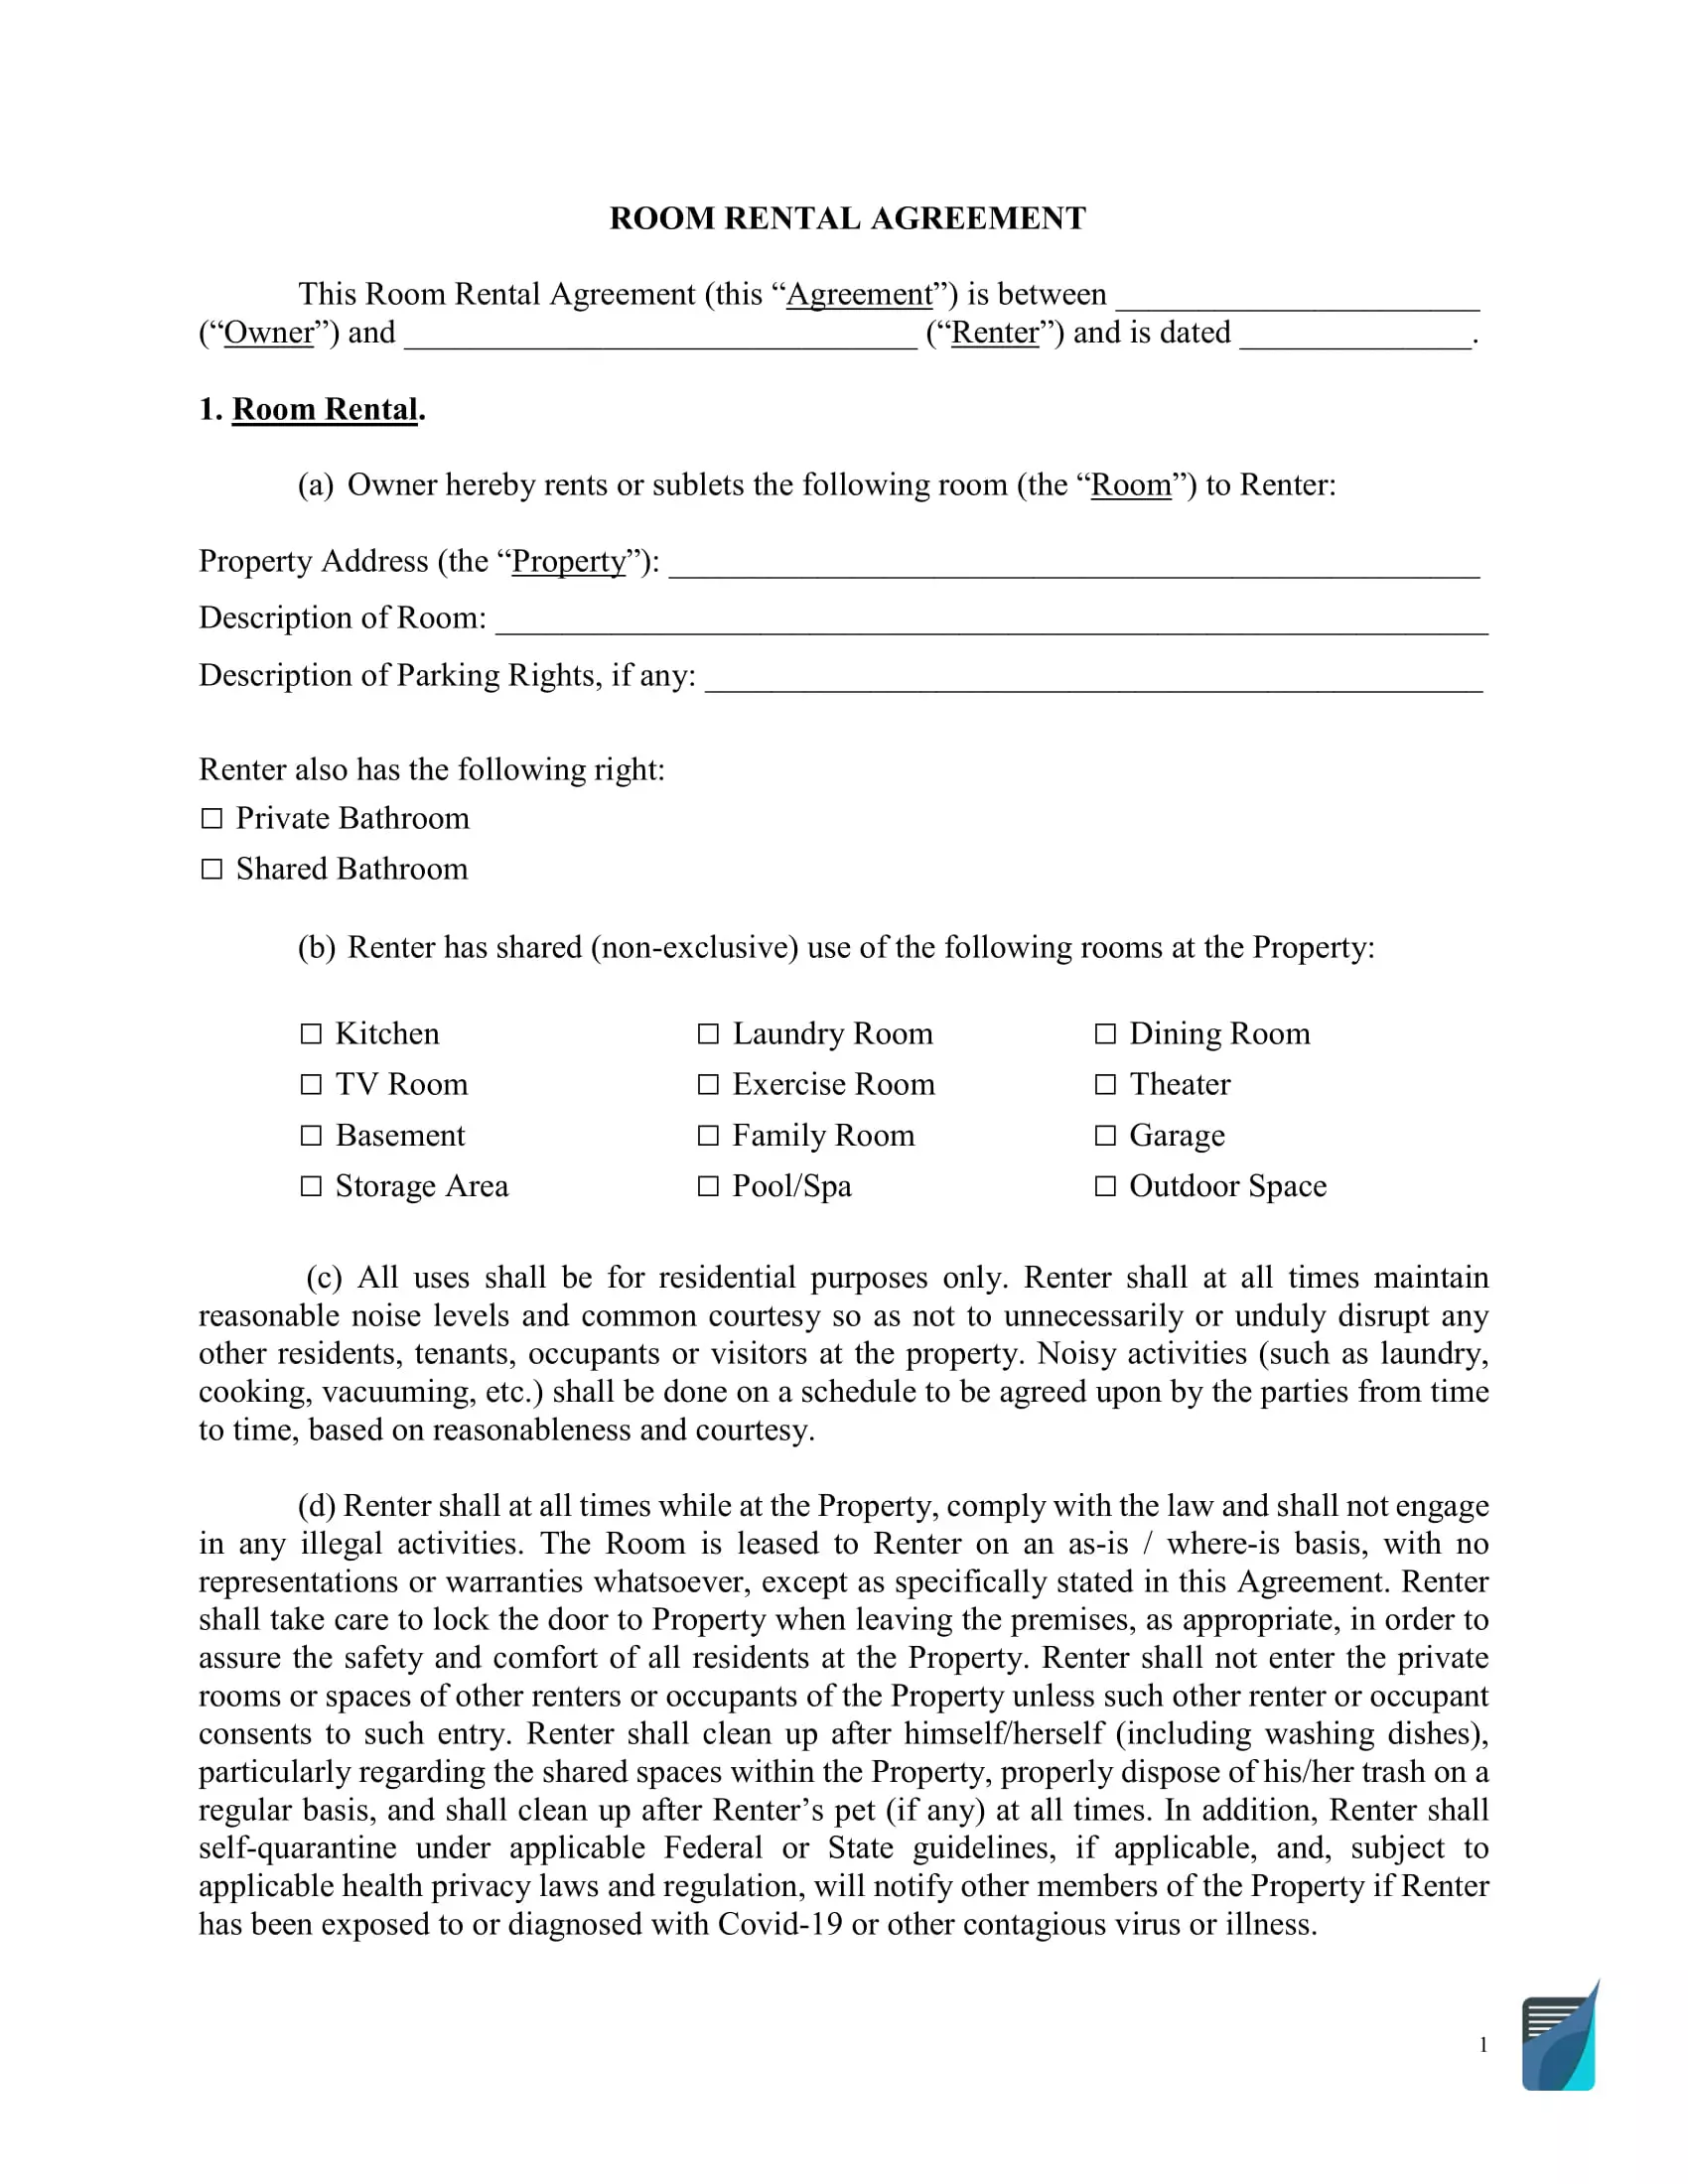 Free Room Rental Agreement Template  Room Lease Contract Within corporate housing lease agreement template